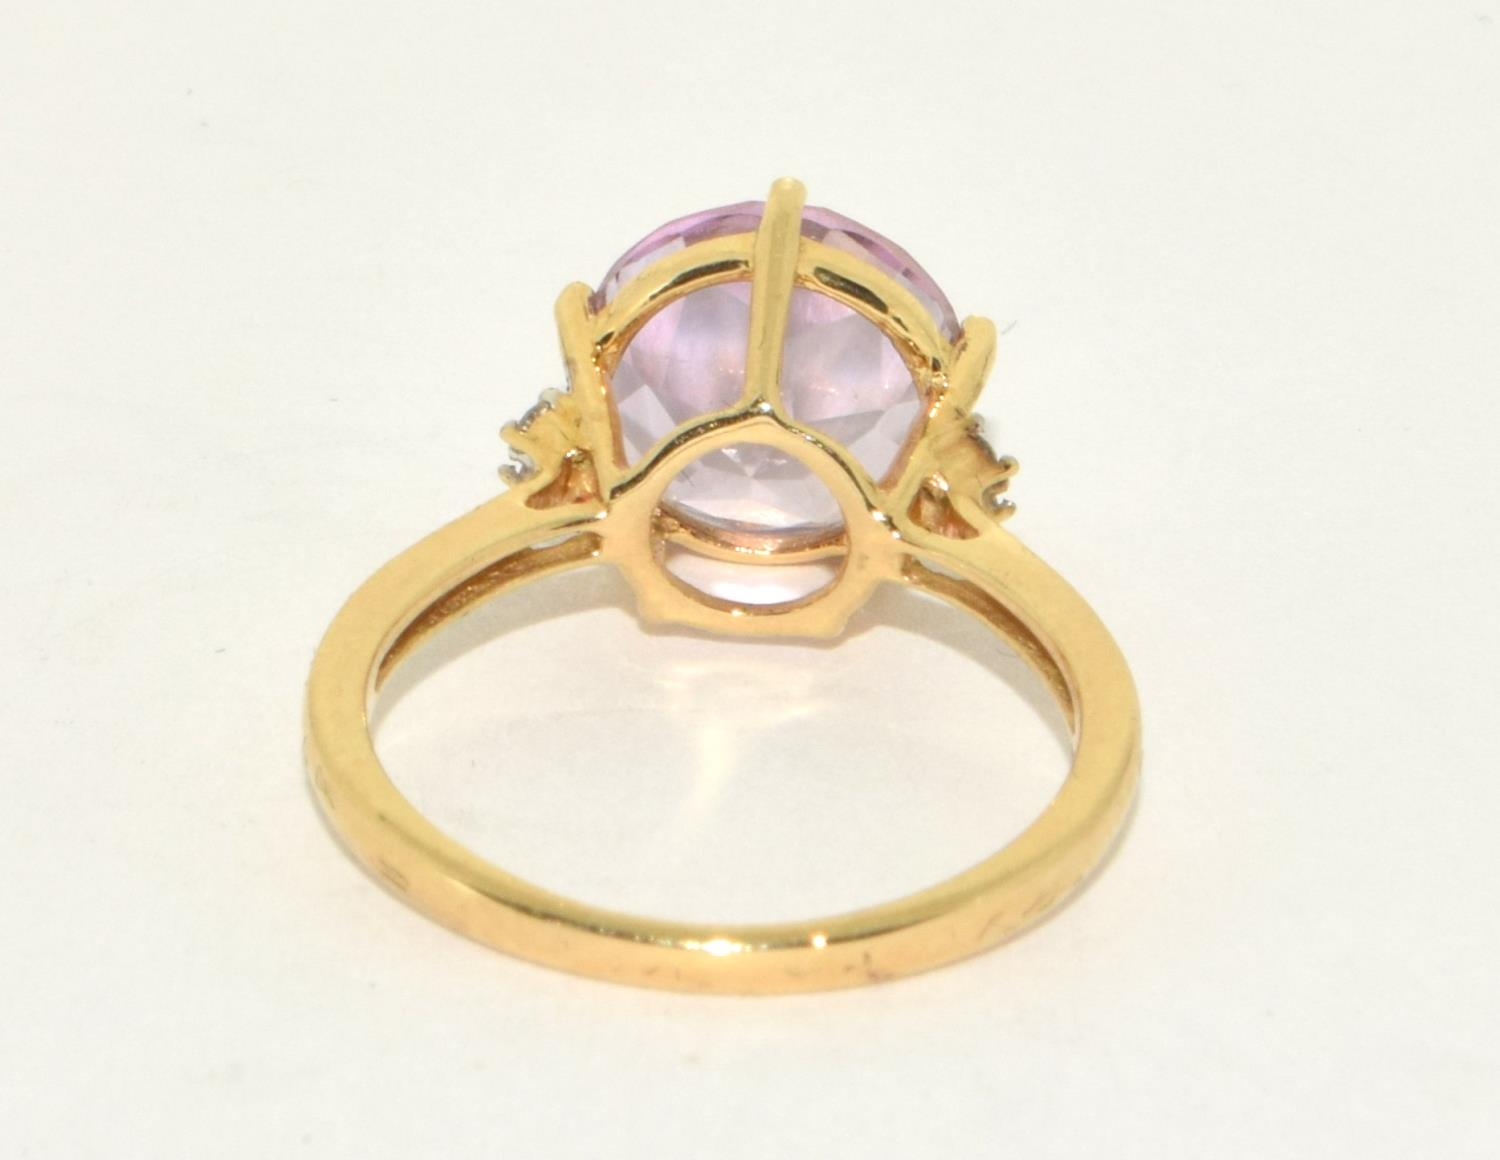 9ct gold ladies Large Amethyst solitaire with of set Diamond ring size N - Image 3 of 5